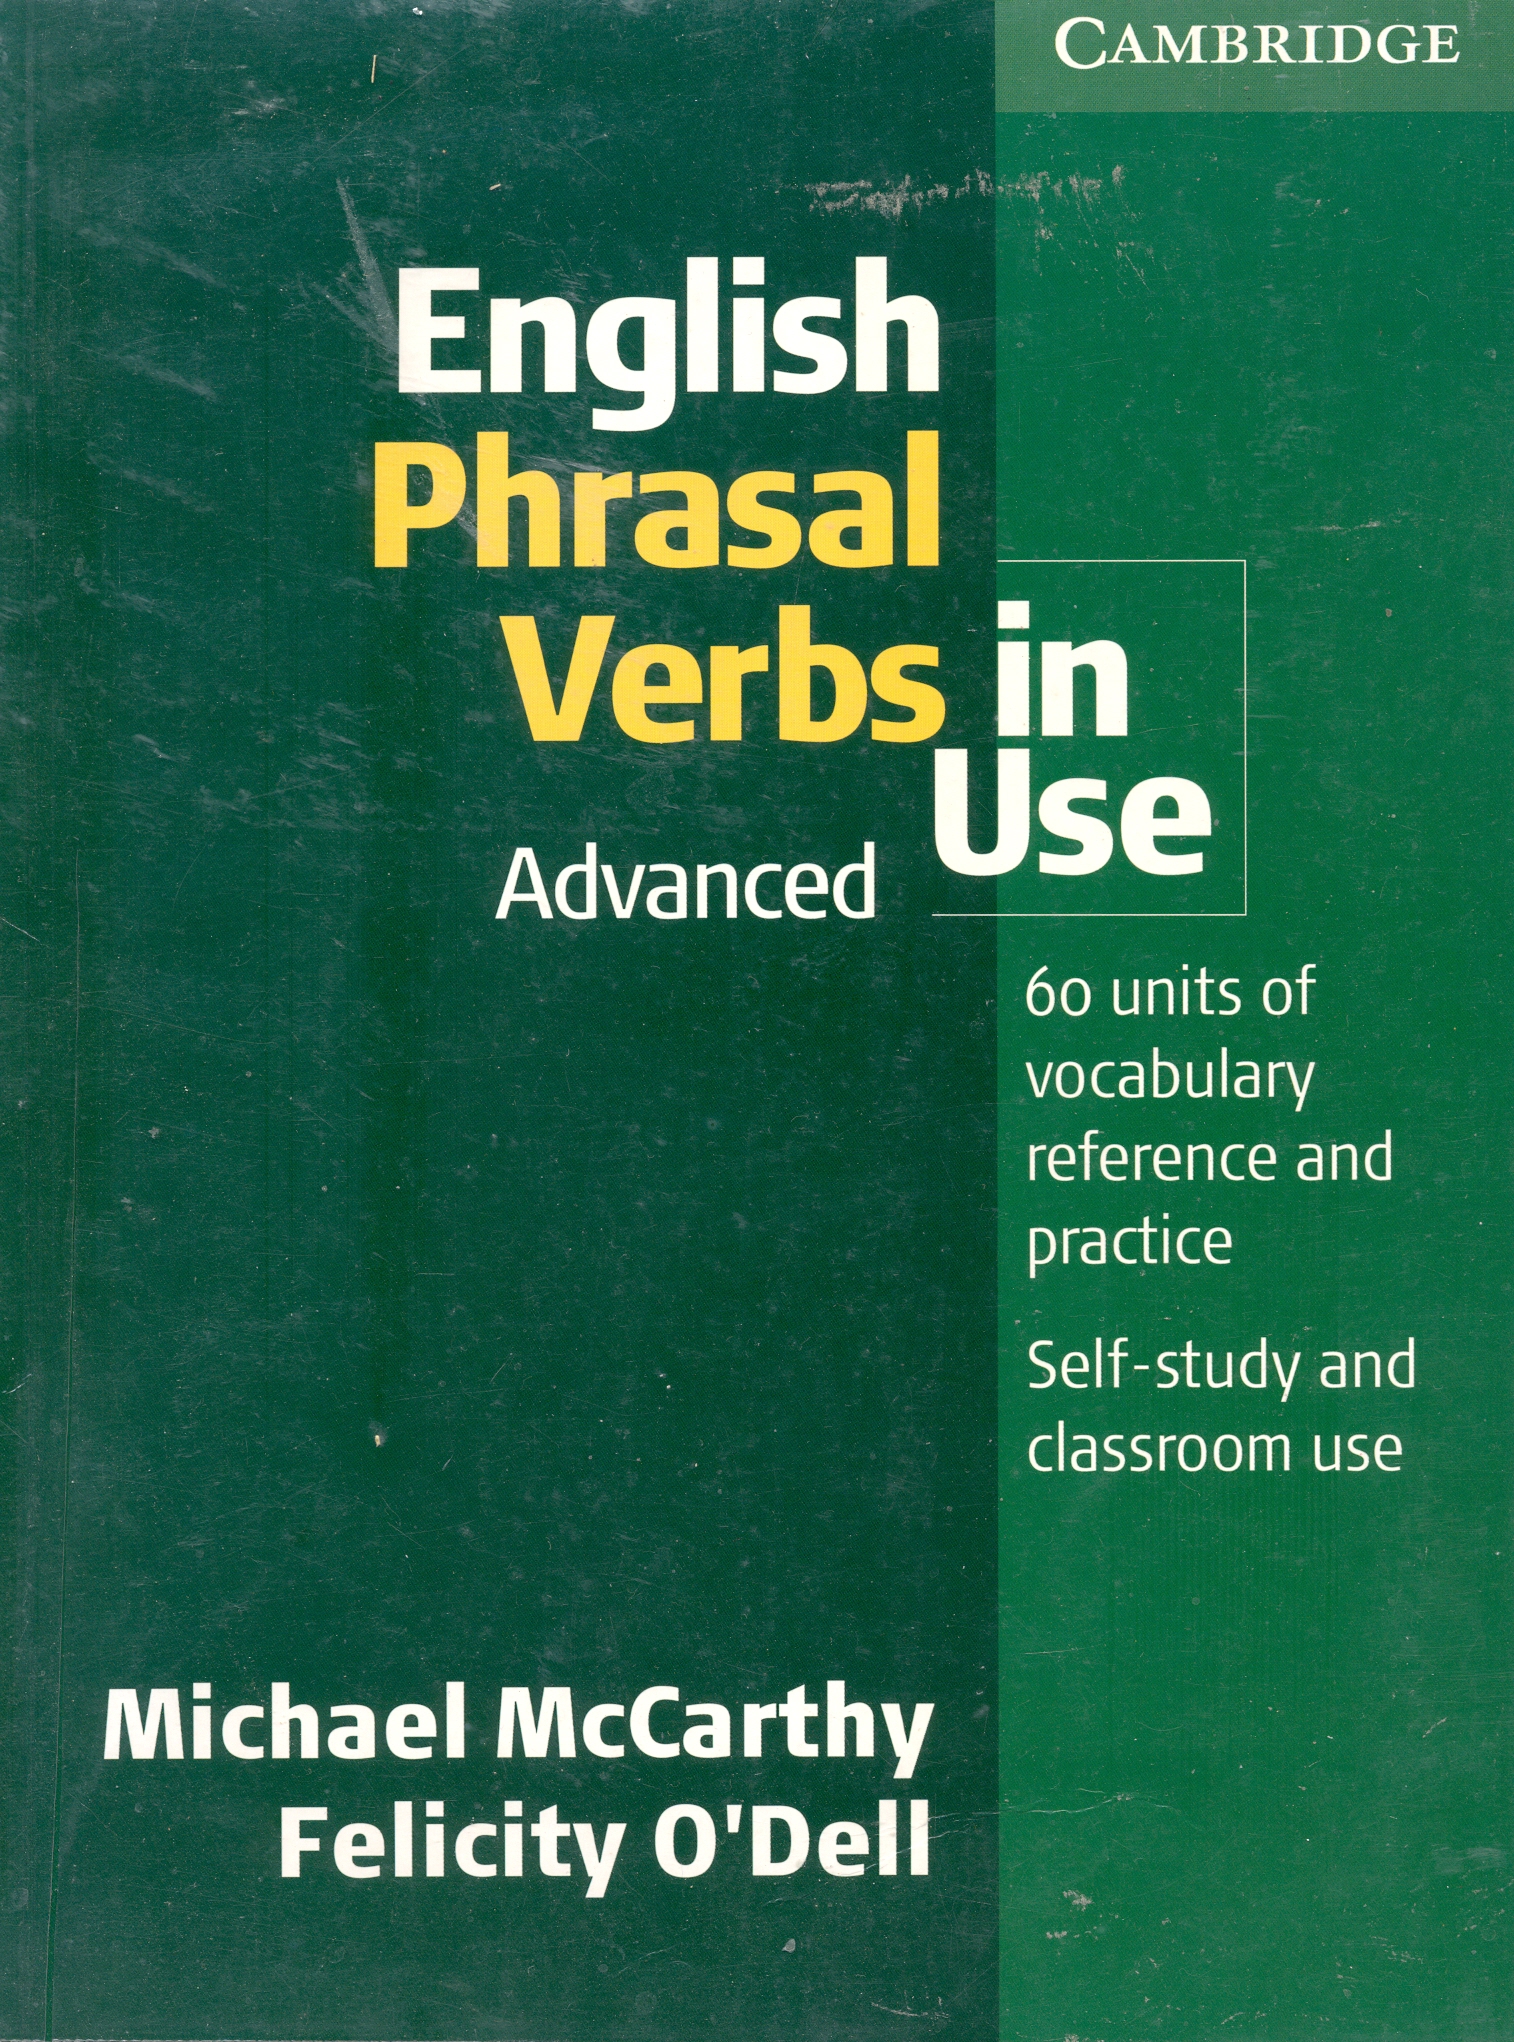 English phrasal verbs in use : advanced 60 units of vocabulary refrence and practice self-study and classroom use